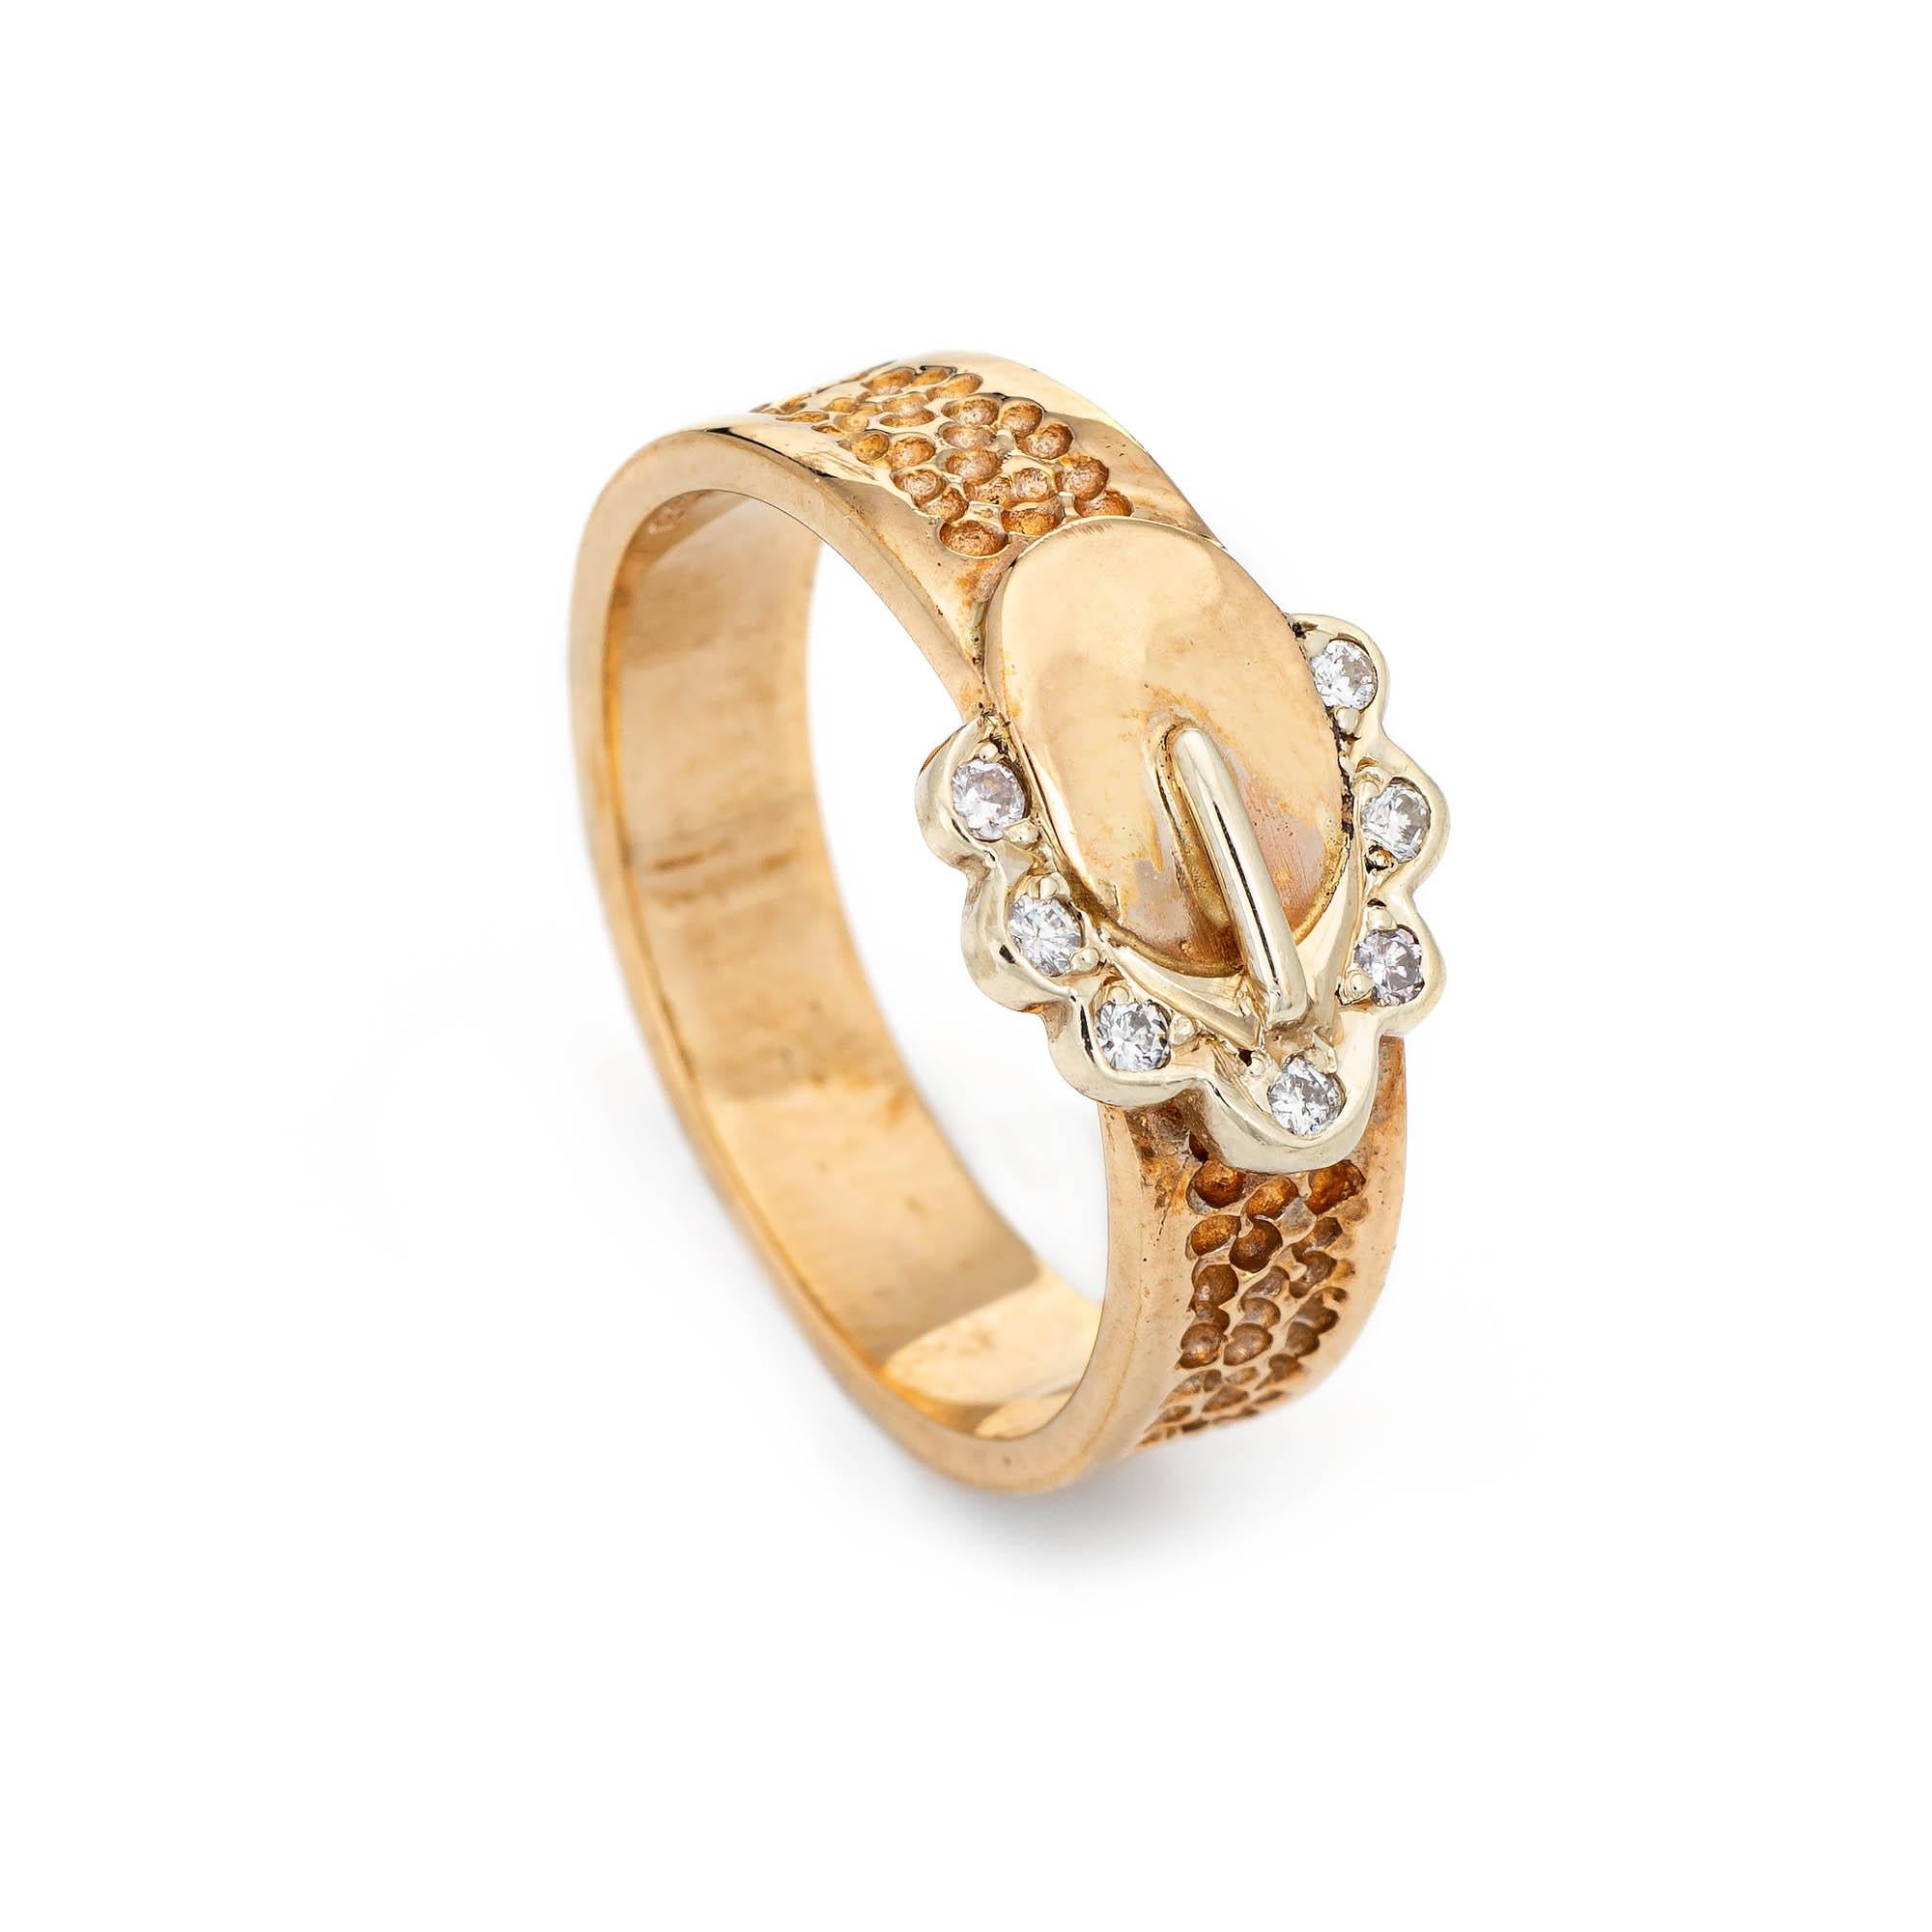 Stylish vintage diamond buckle ring crafted in in 9 karat yellow gold (circa 1960s to 1970s). 

Round brilliant cut diamonds total an estimated  0.14 carats (estimated at I-J color and SI1-2 clarity). 

The romantic buckle motif represents the